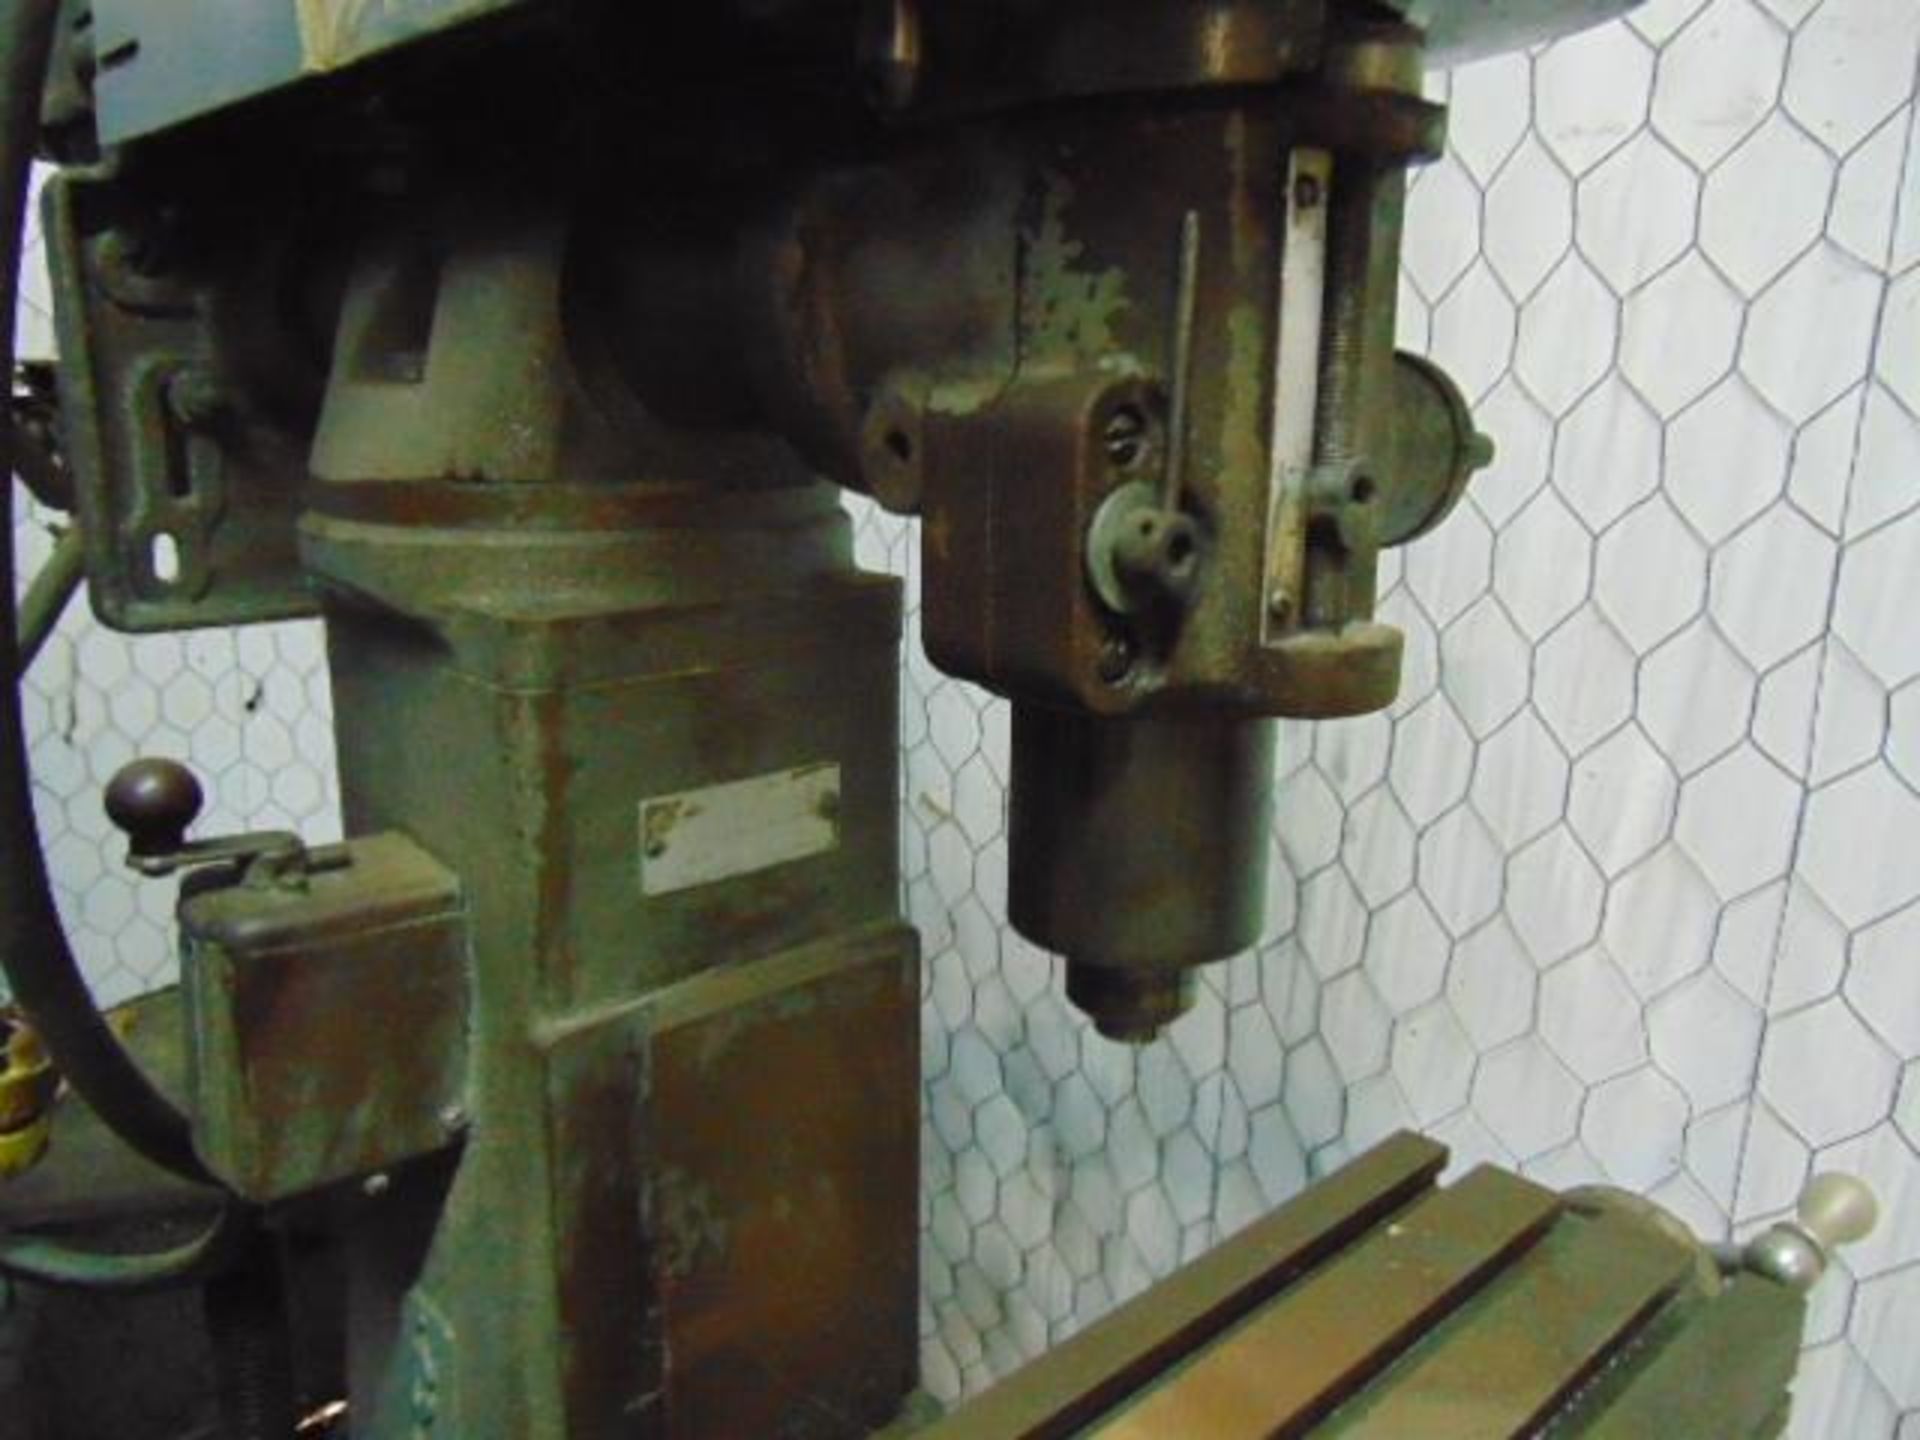 VERTICAL MILLING MACHINE, CLAUSING MDL. 8520, 6" x 24" tbl., S/N 002601 - Image 4 of 6